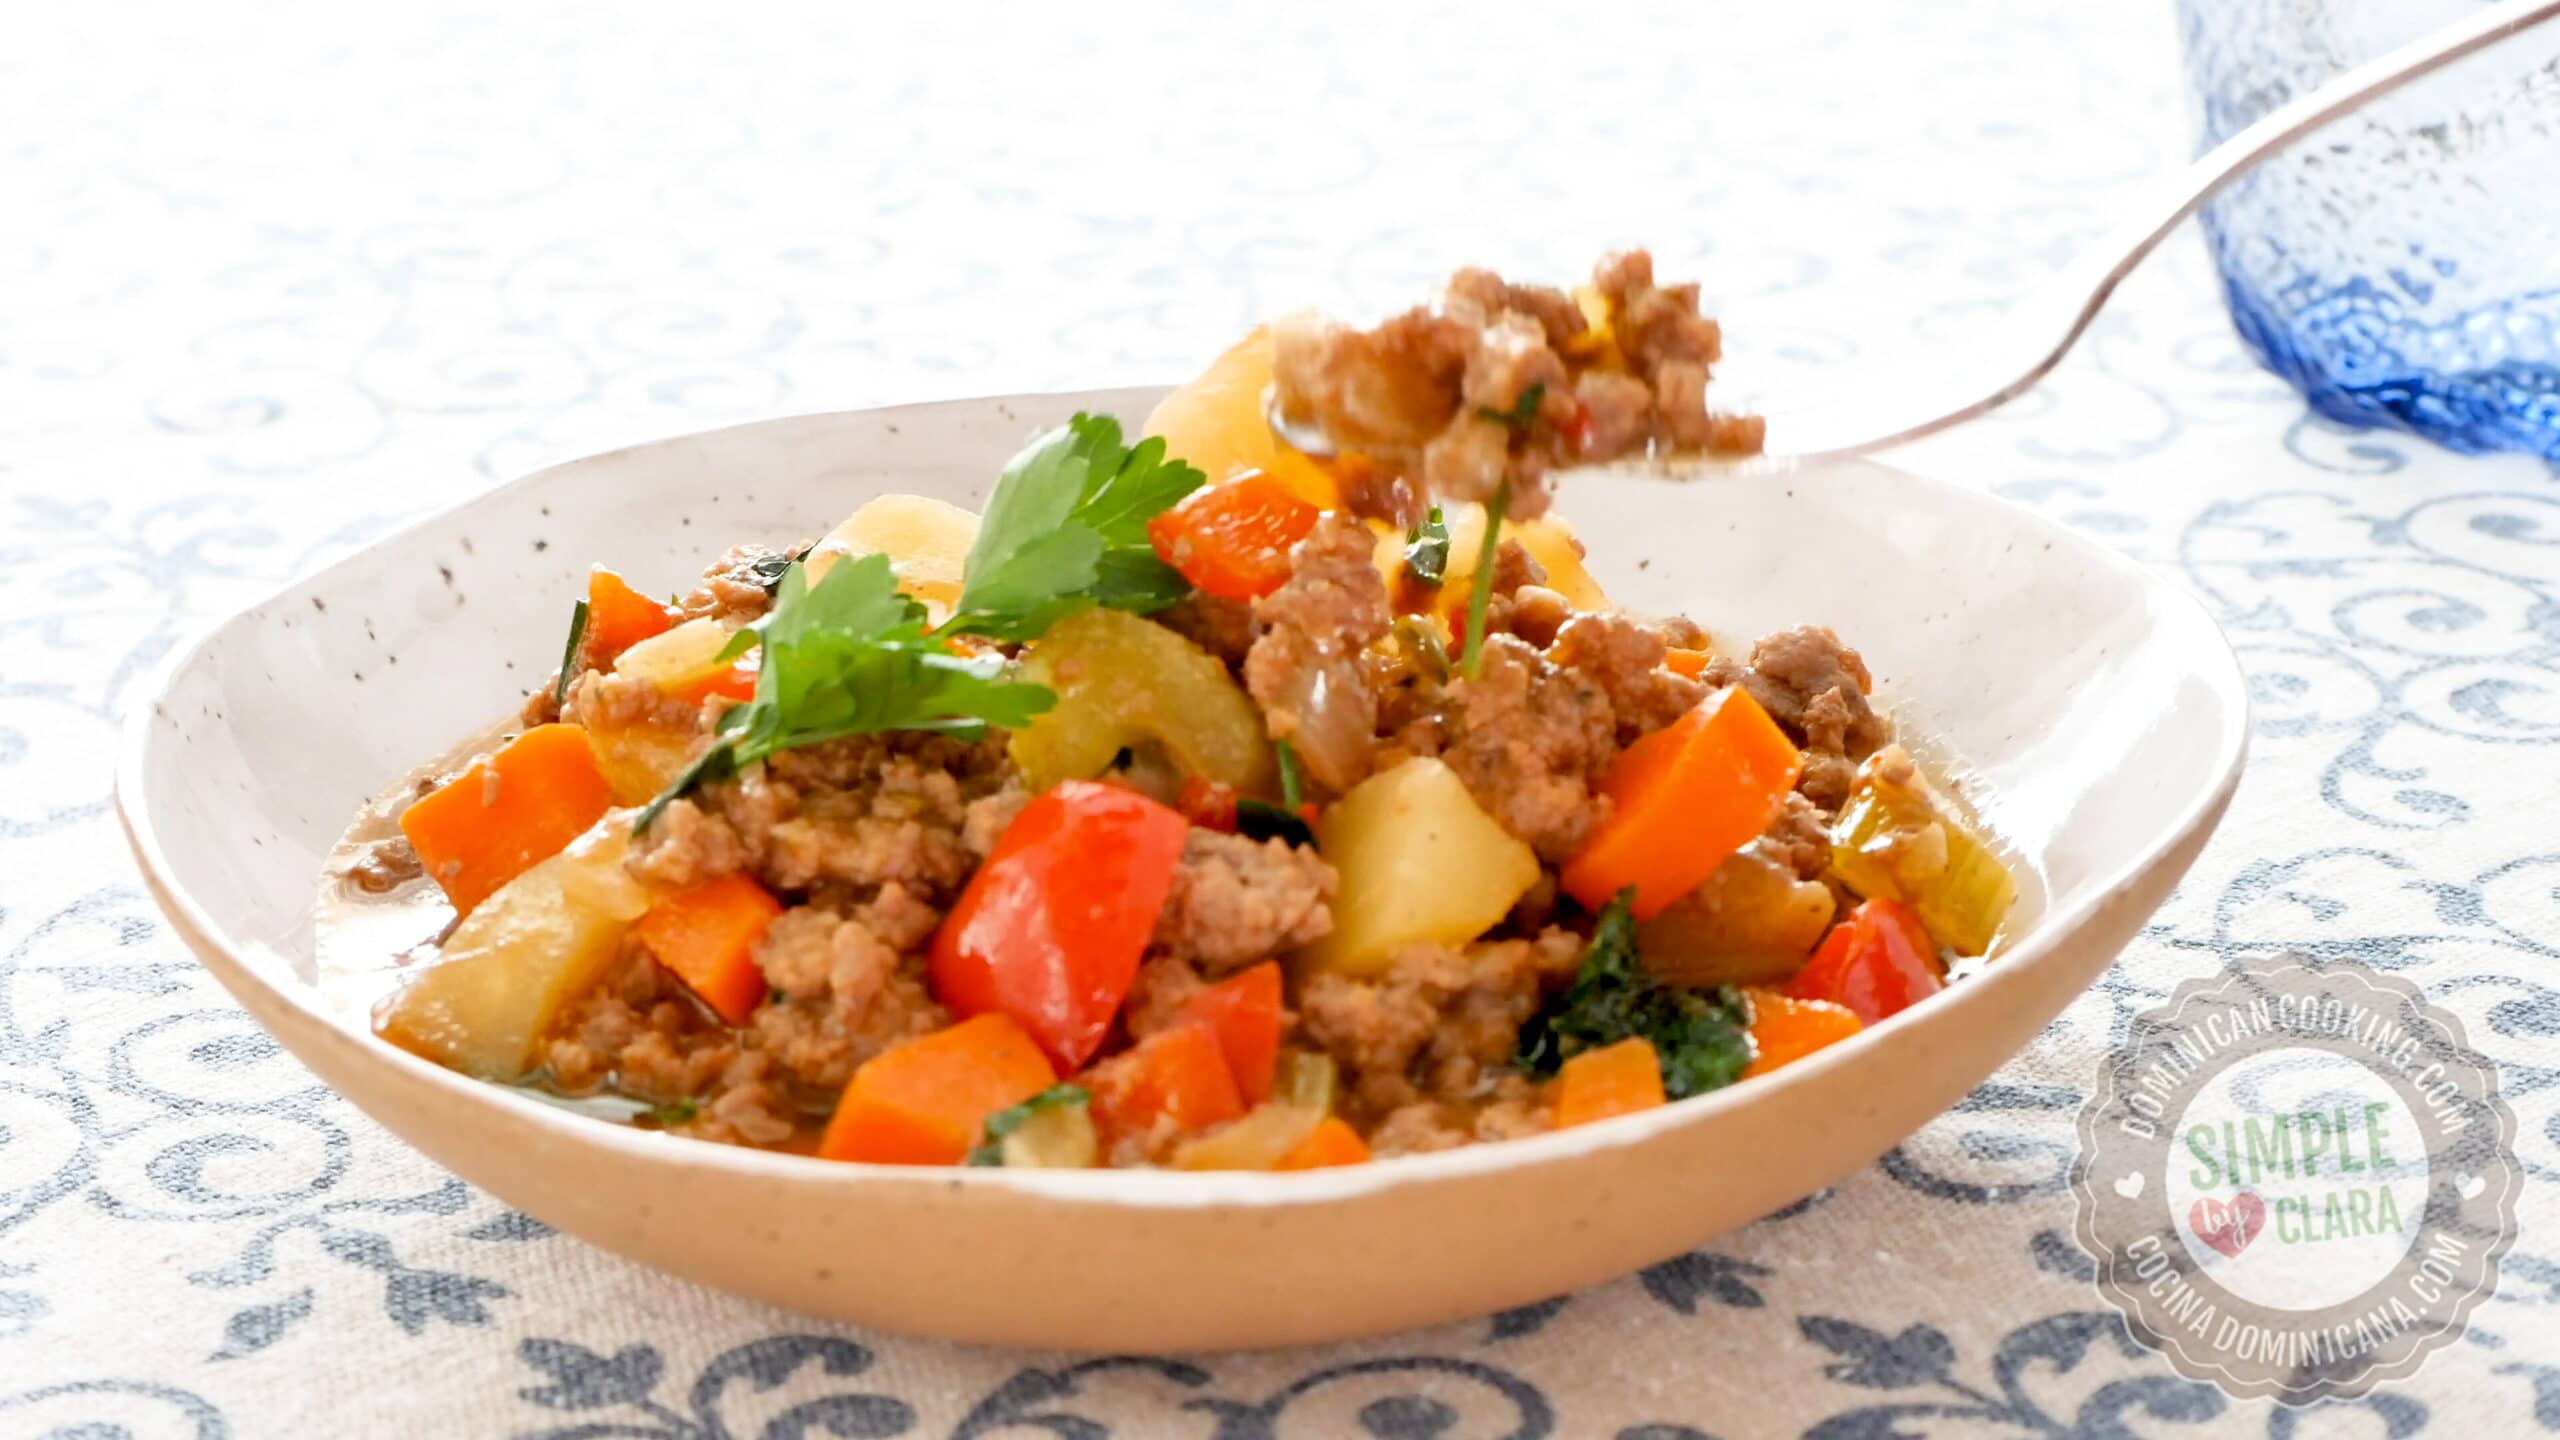 Served minced beef with vegetables